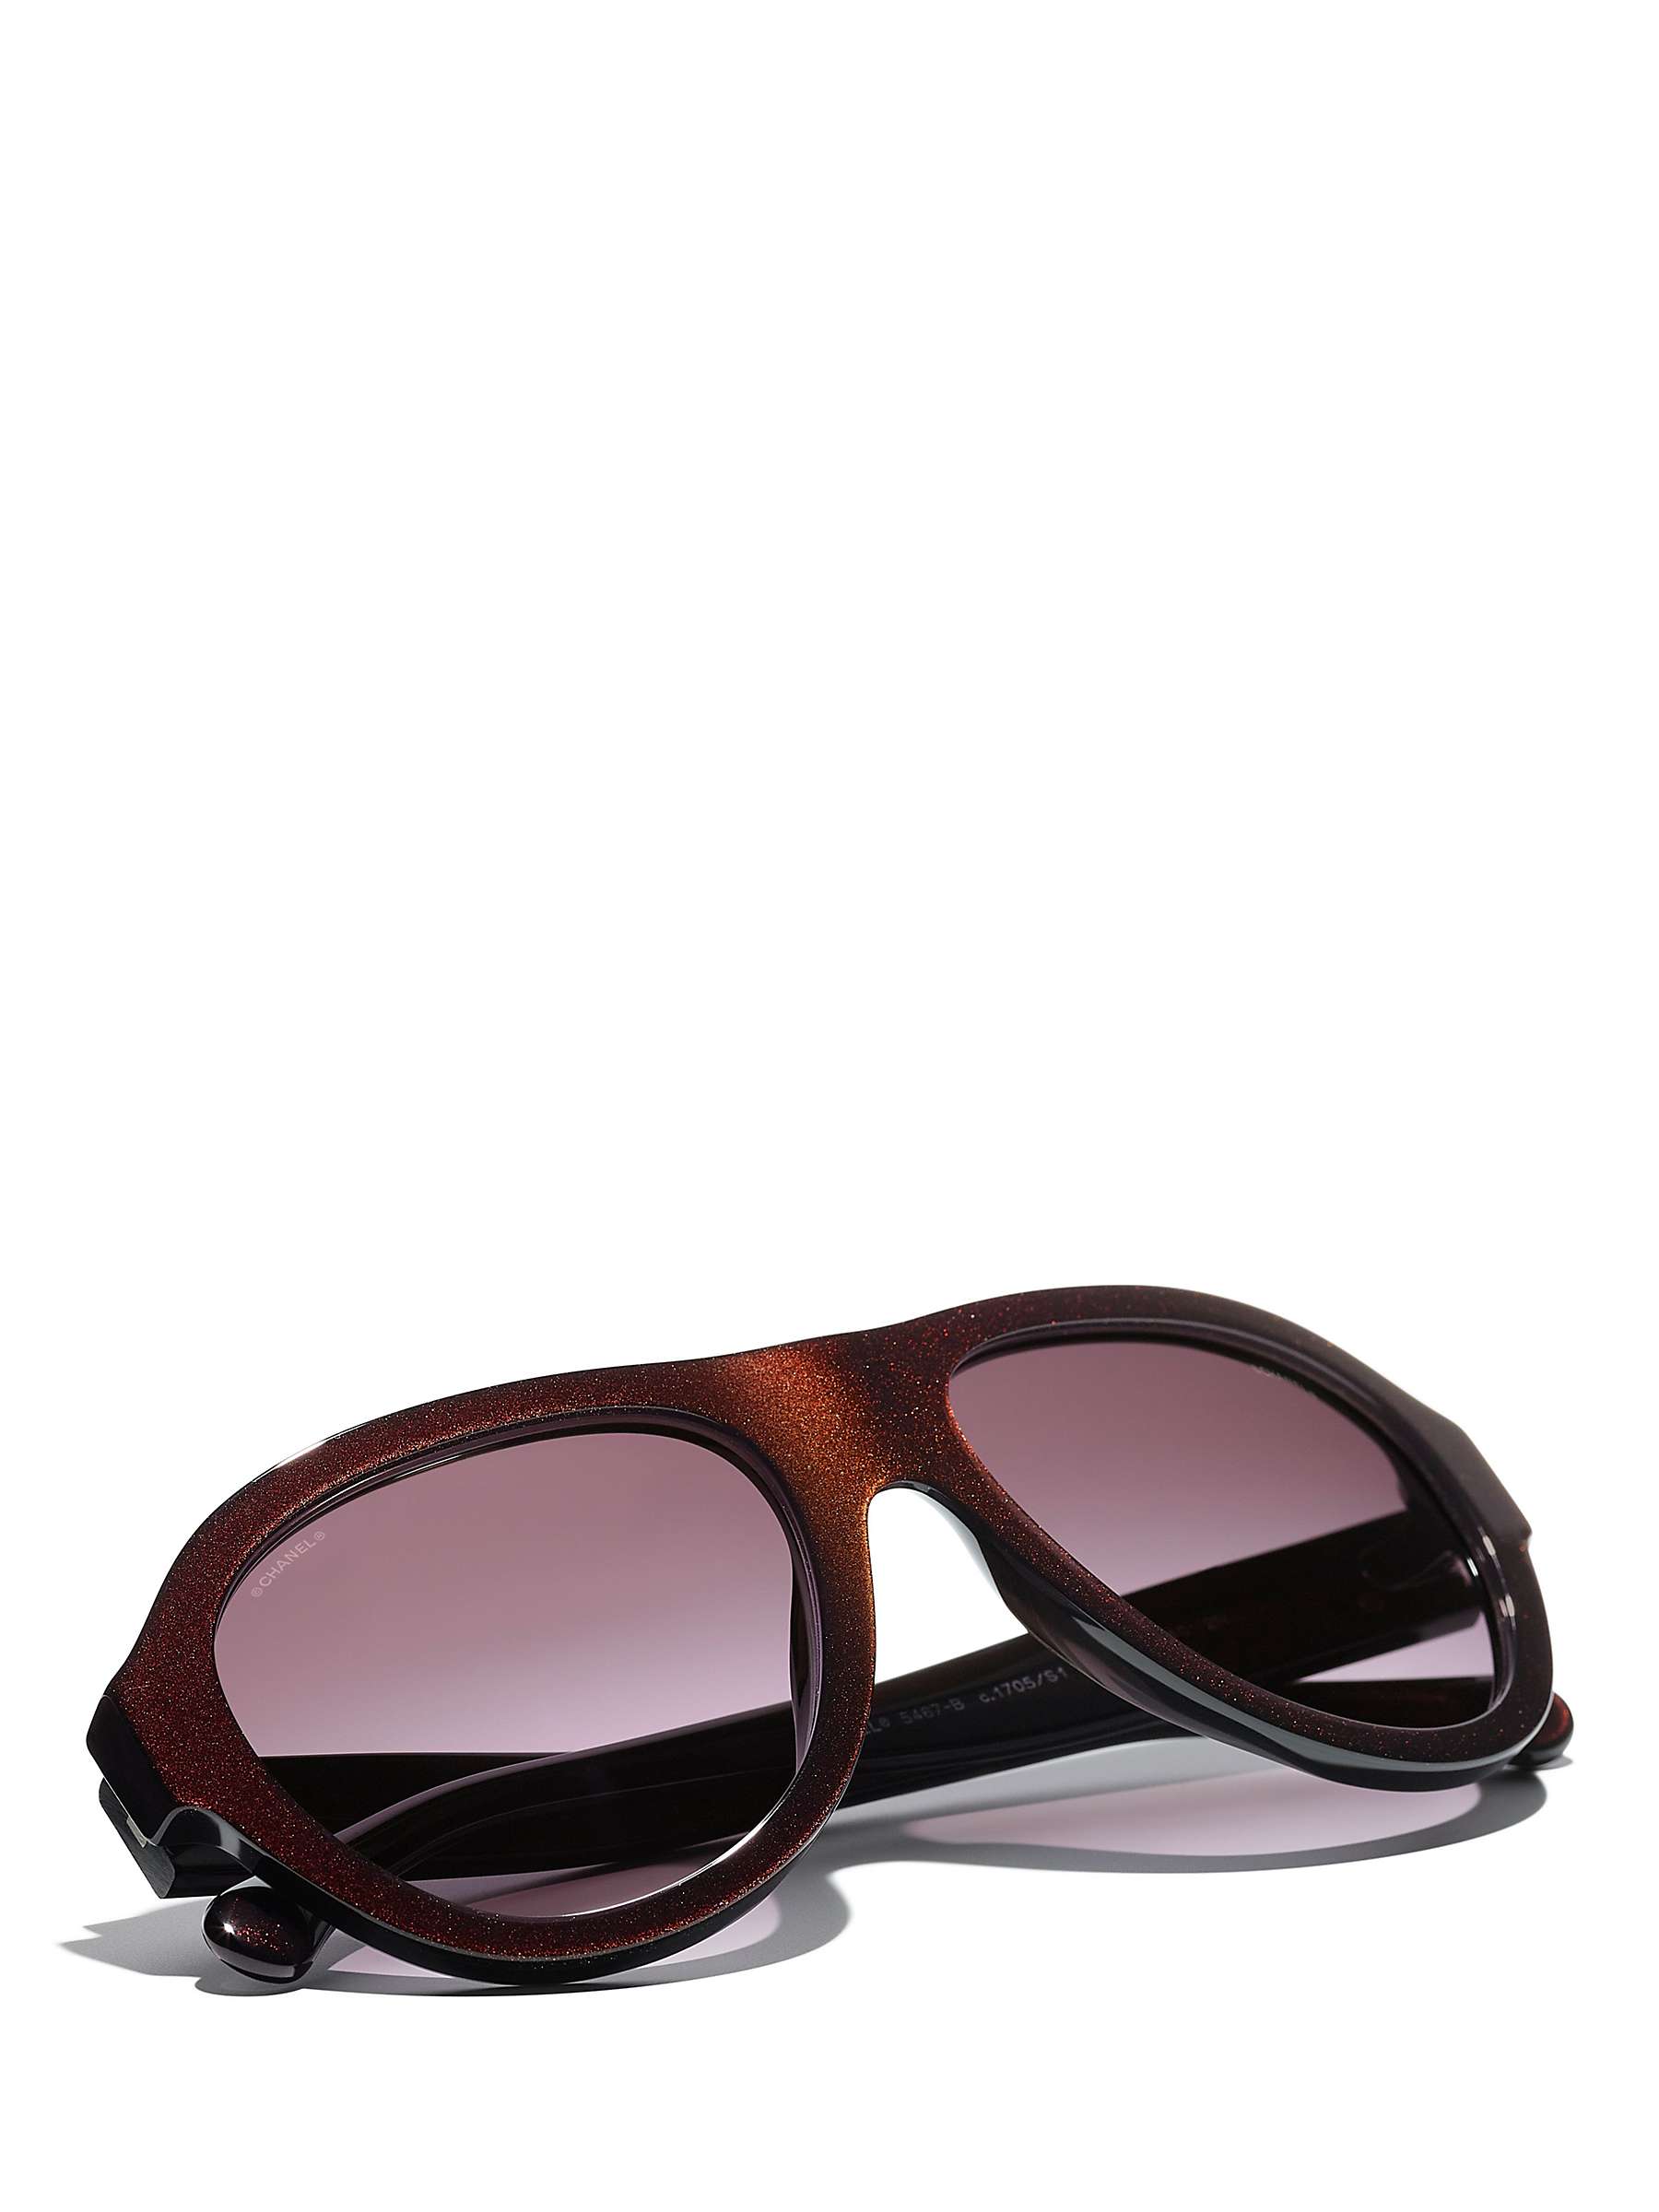 Buy CHANEL Oval Sunglasses CH5467B Iridescent Red/Violet Gradient Online at johnlewis.com